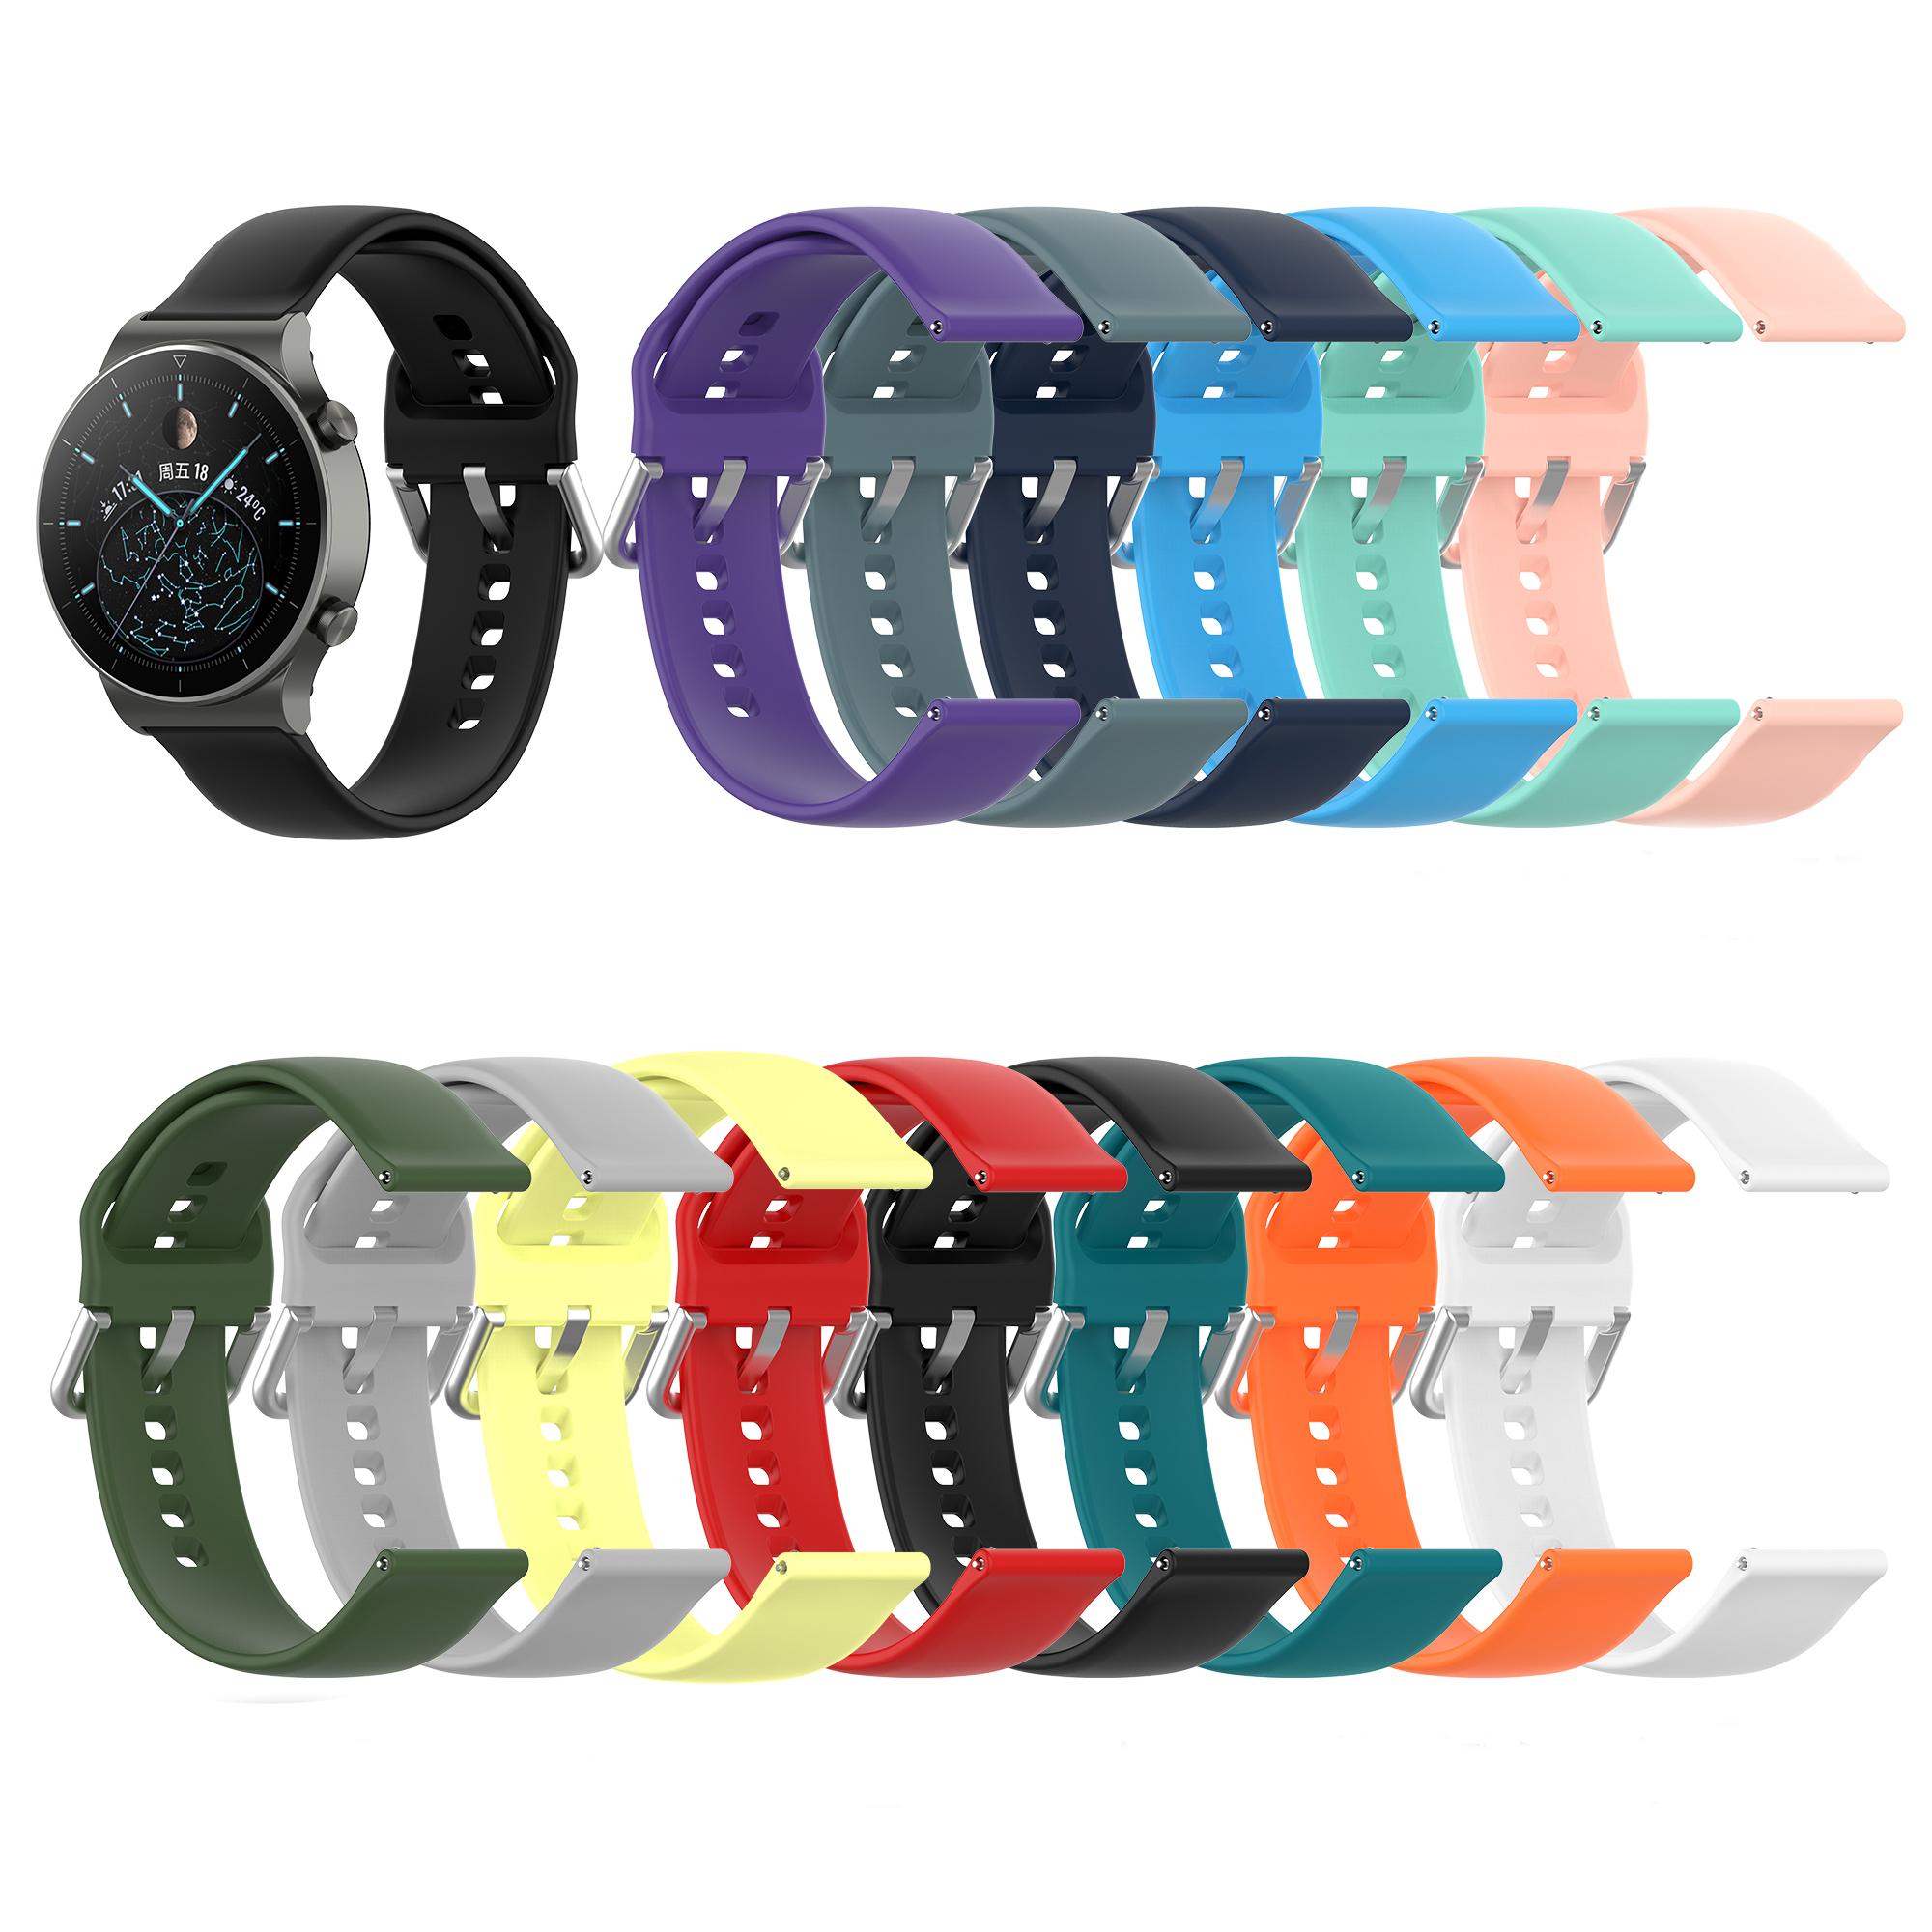 Bakeey-22mm-Multi-color-Silicone-Siver-Buckle-Replacement-Strap-Smart-Watch-Band-For-Huawei-Watch-GT-1768637-1